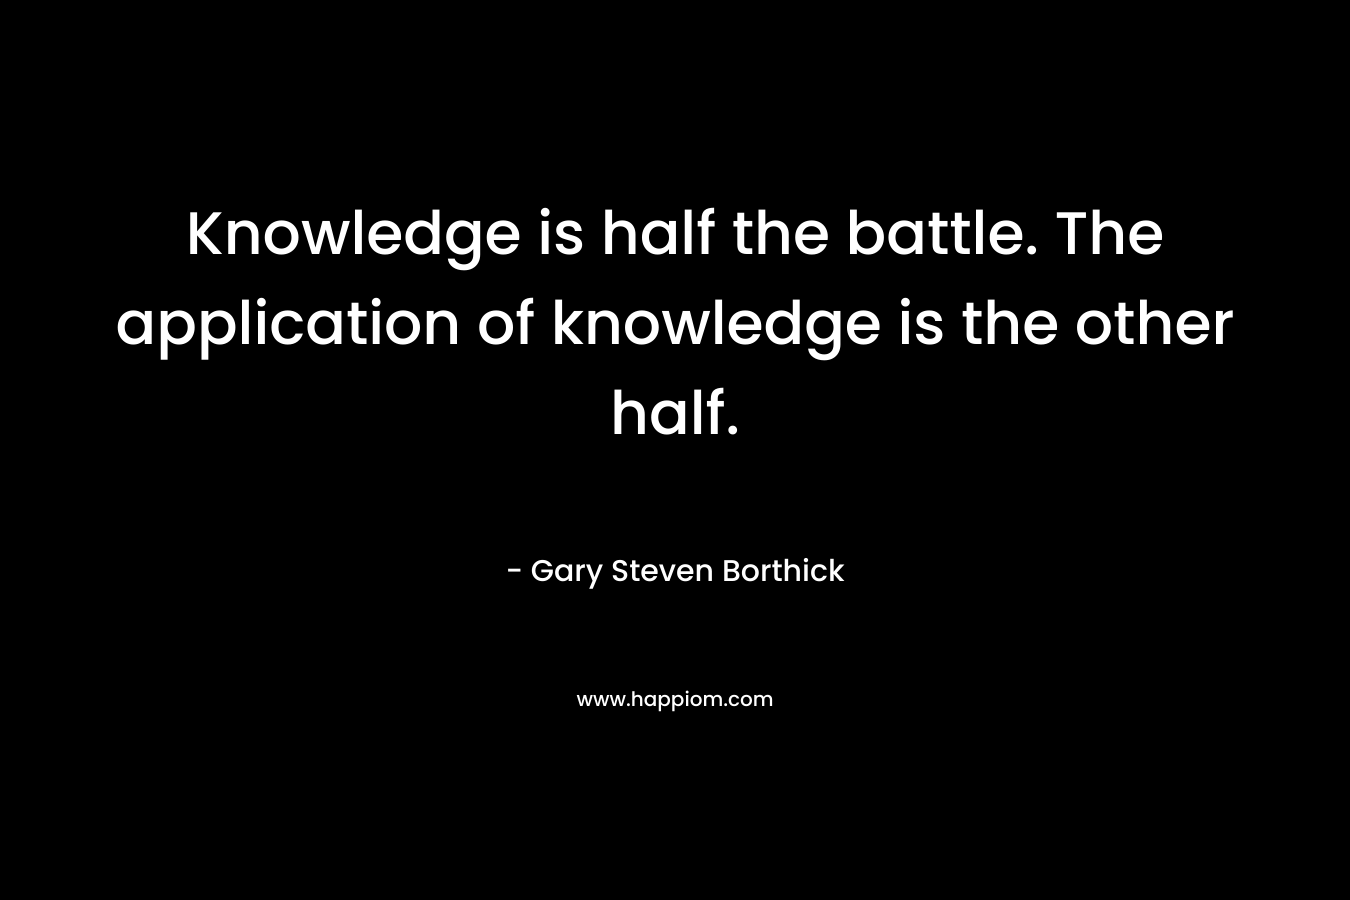 Knowledge is half the battle. The application of knowledge is the other half.